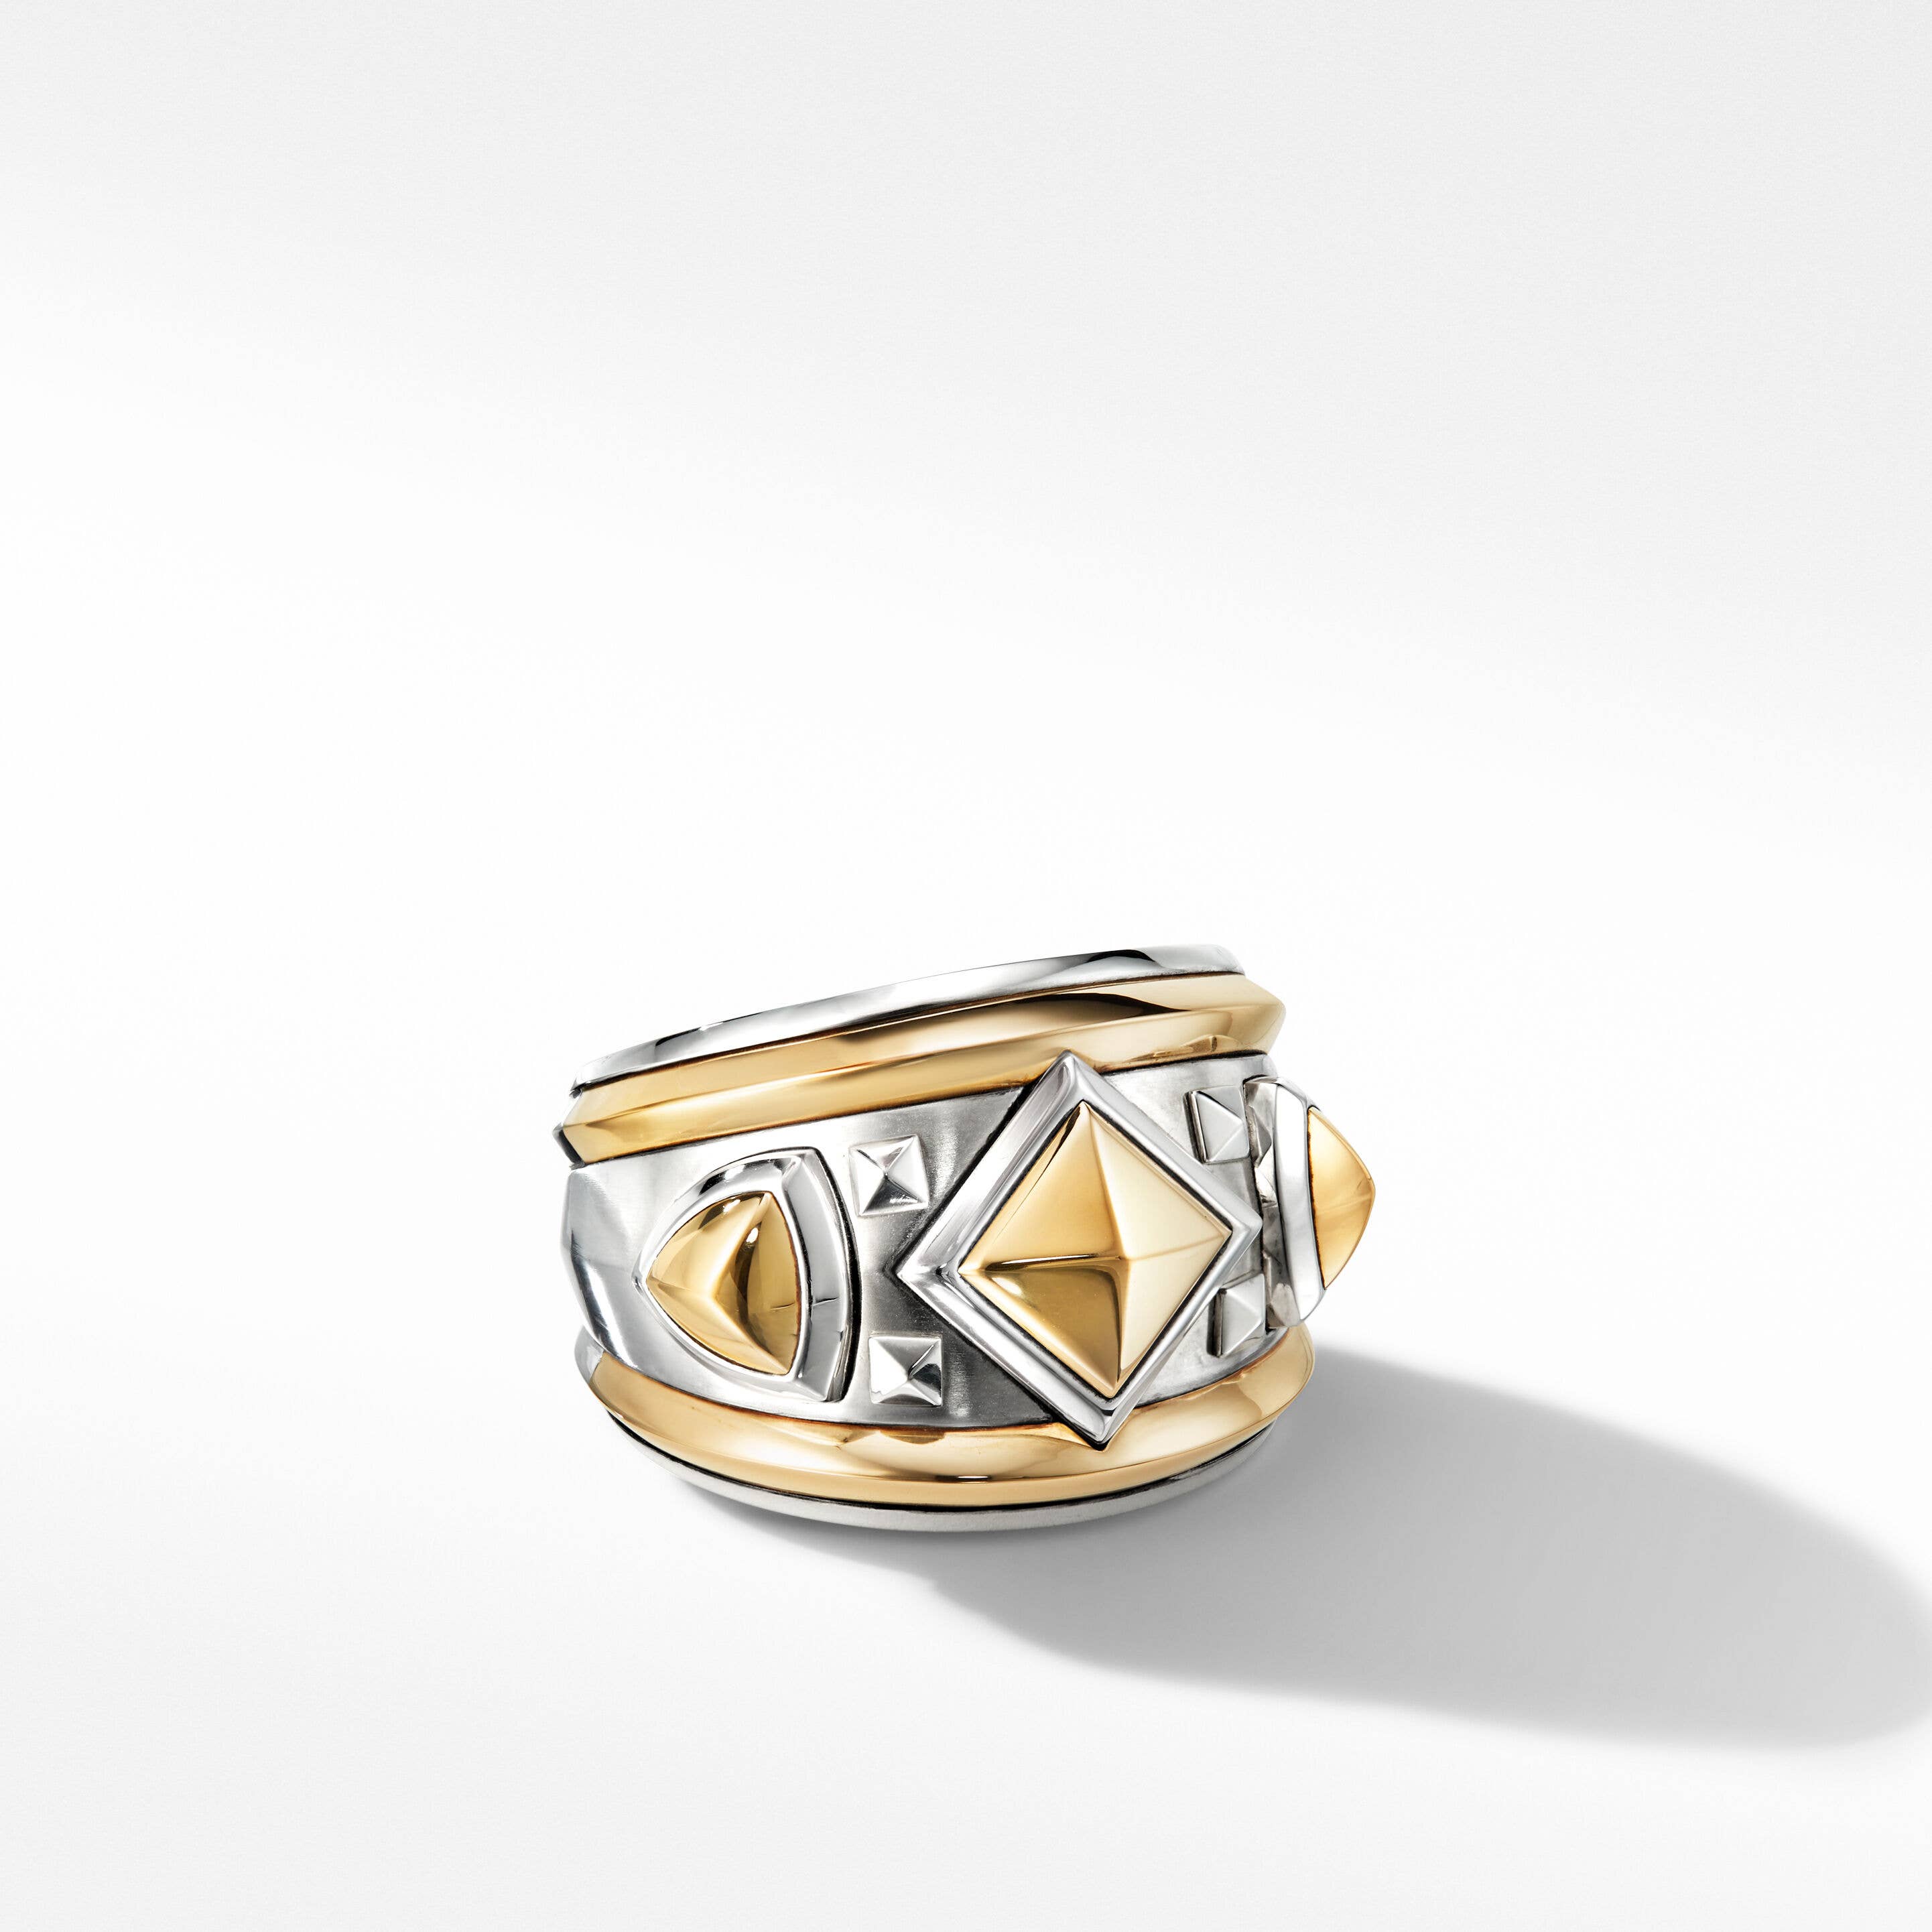 Modern Renaissance Ring with 18K Yellow Gold